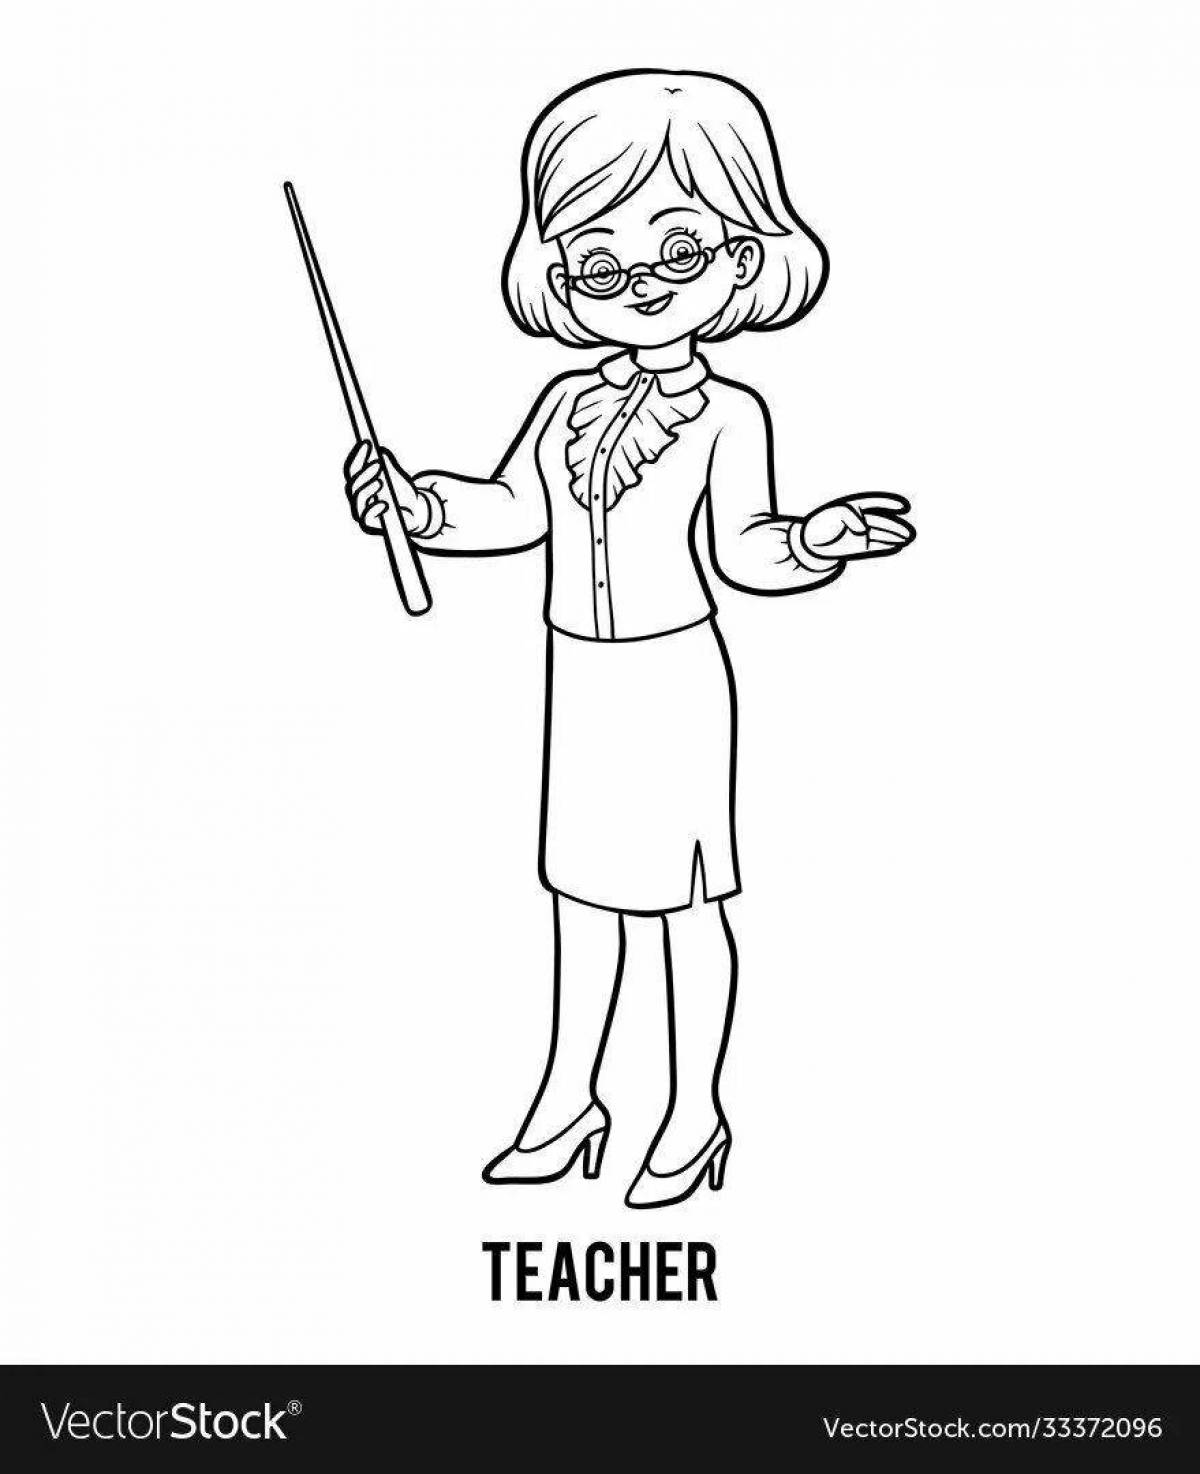 Bright teacher drawing page